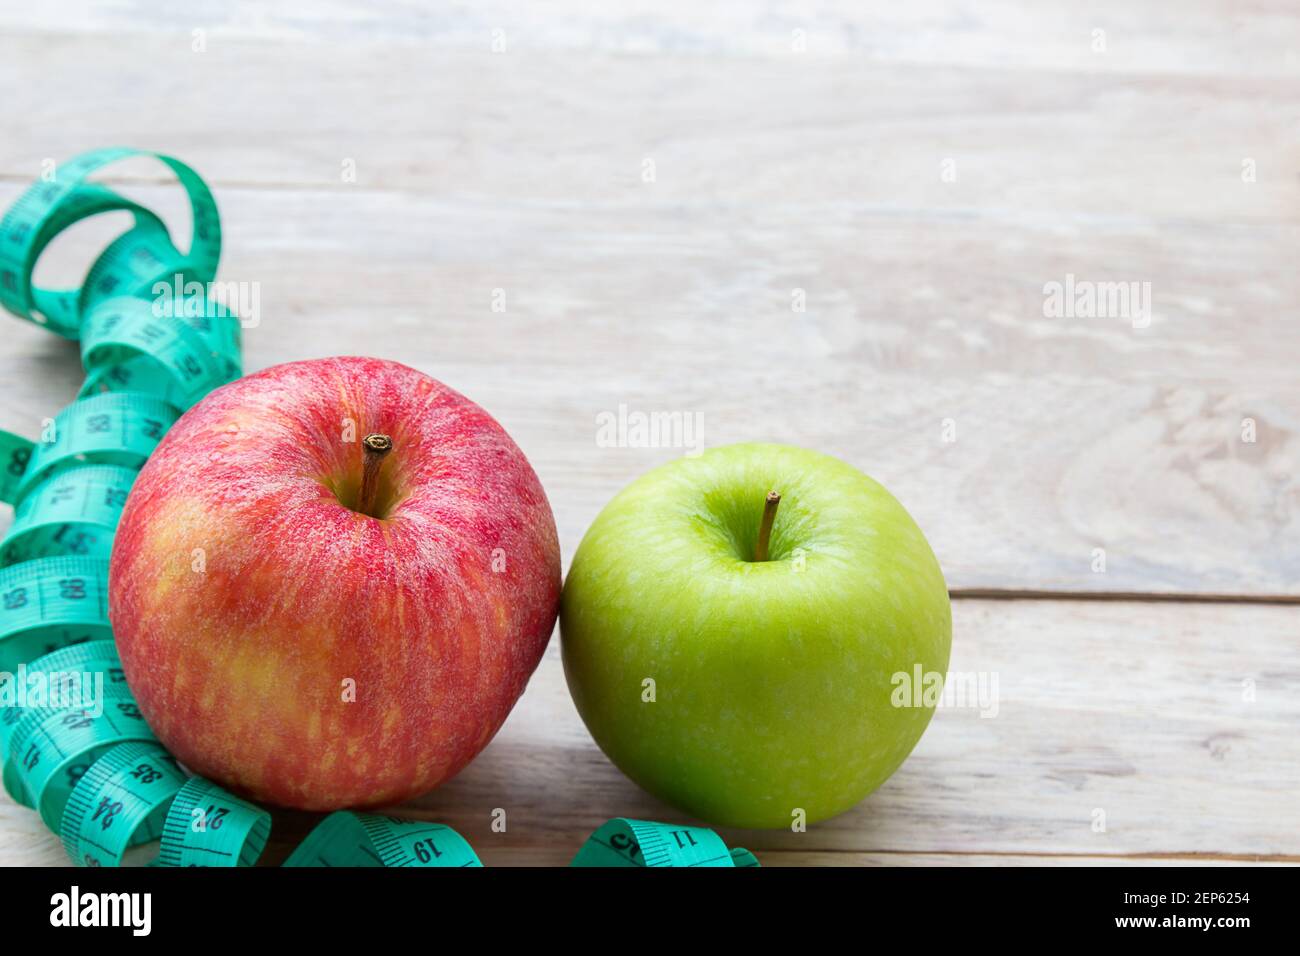 https://c8.alamy.com/comp/2EP6254/healthy-lifestyle-concept-with-apples-weight-loss-or-diet-concept-red-apple-and-green-measure-tape-on-wood-table-background-with-copy-space-for-desi-2EP6254.jpg